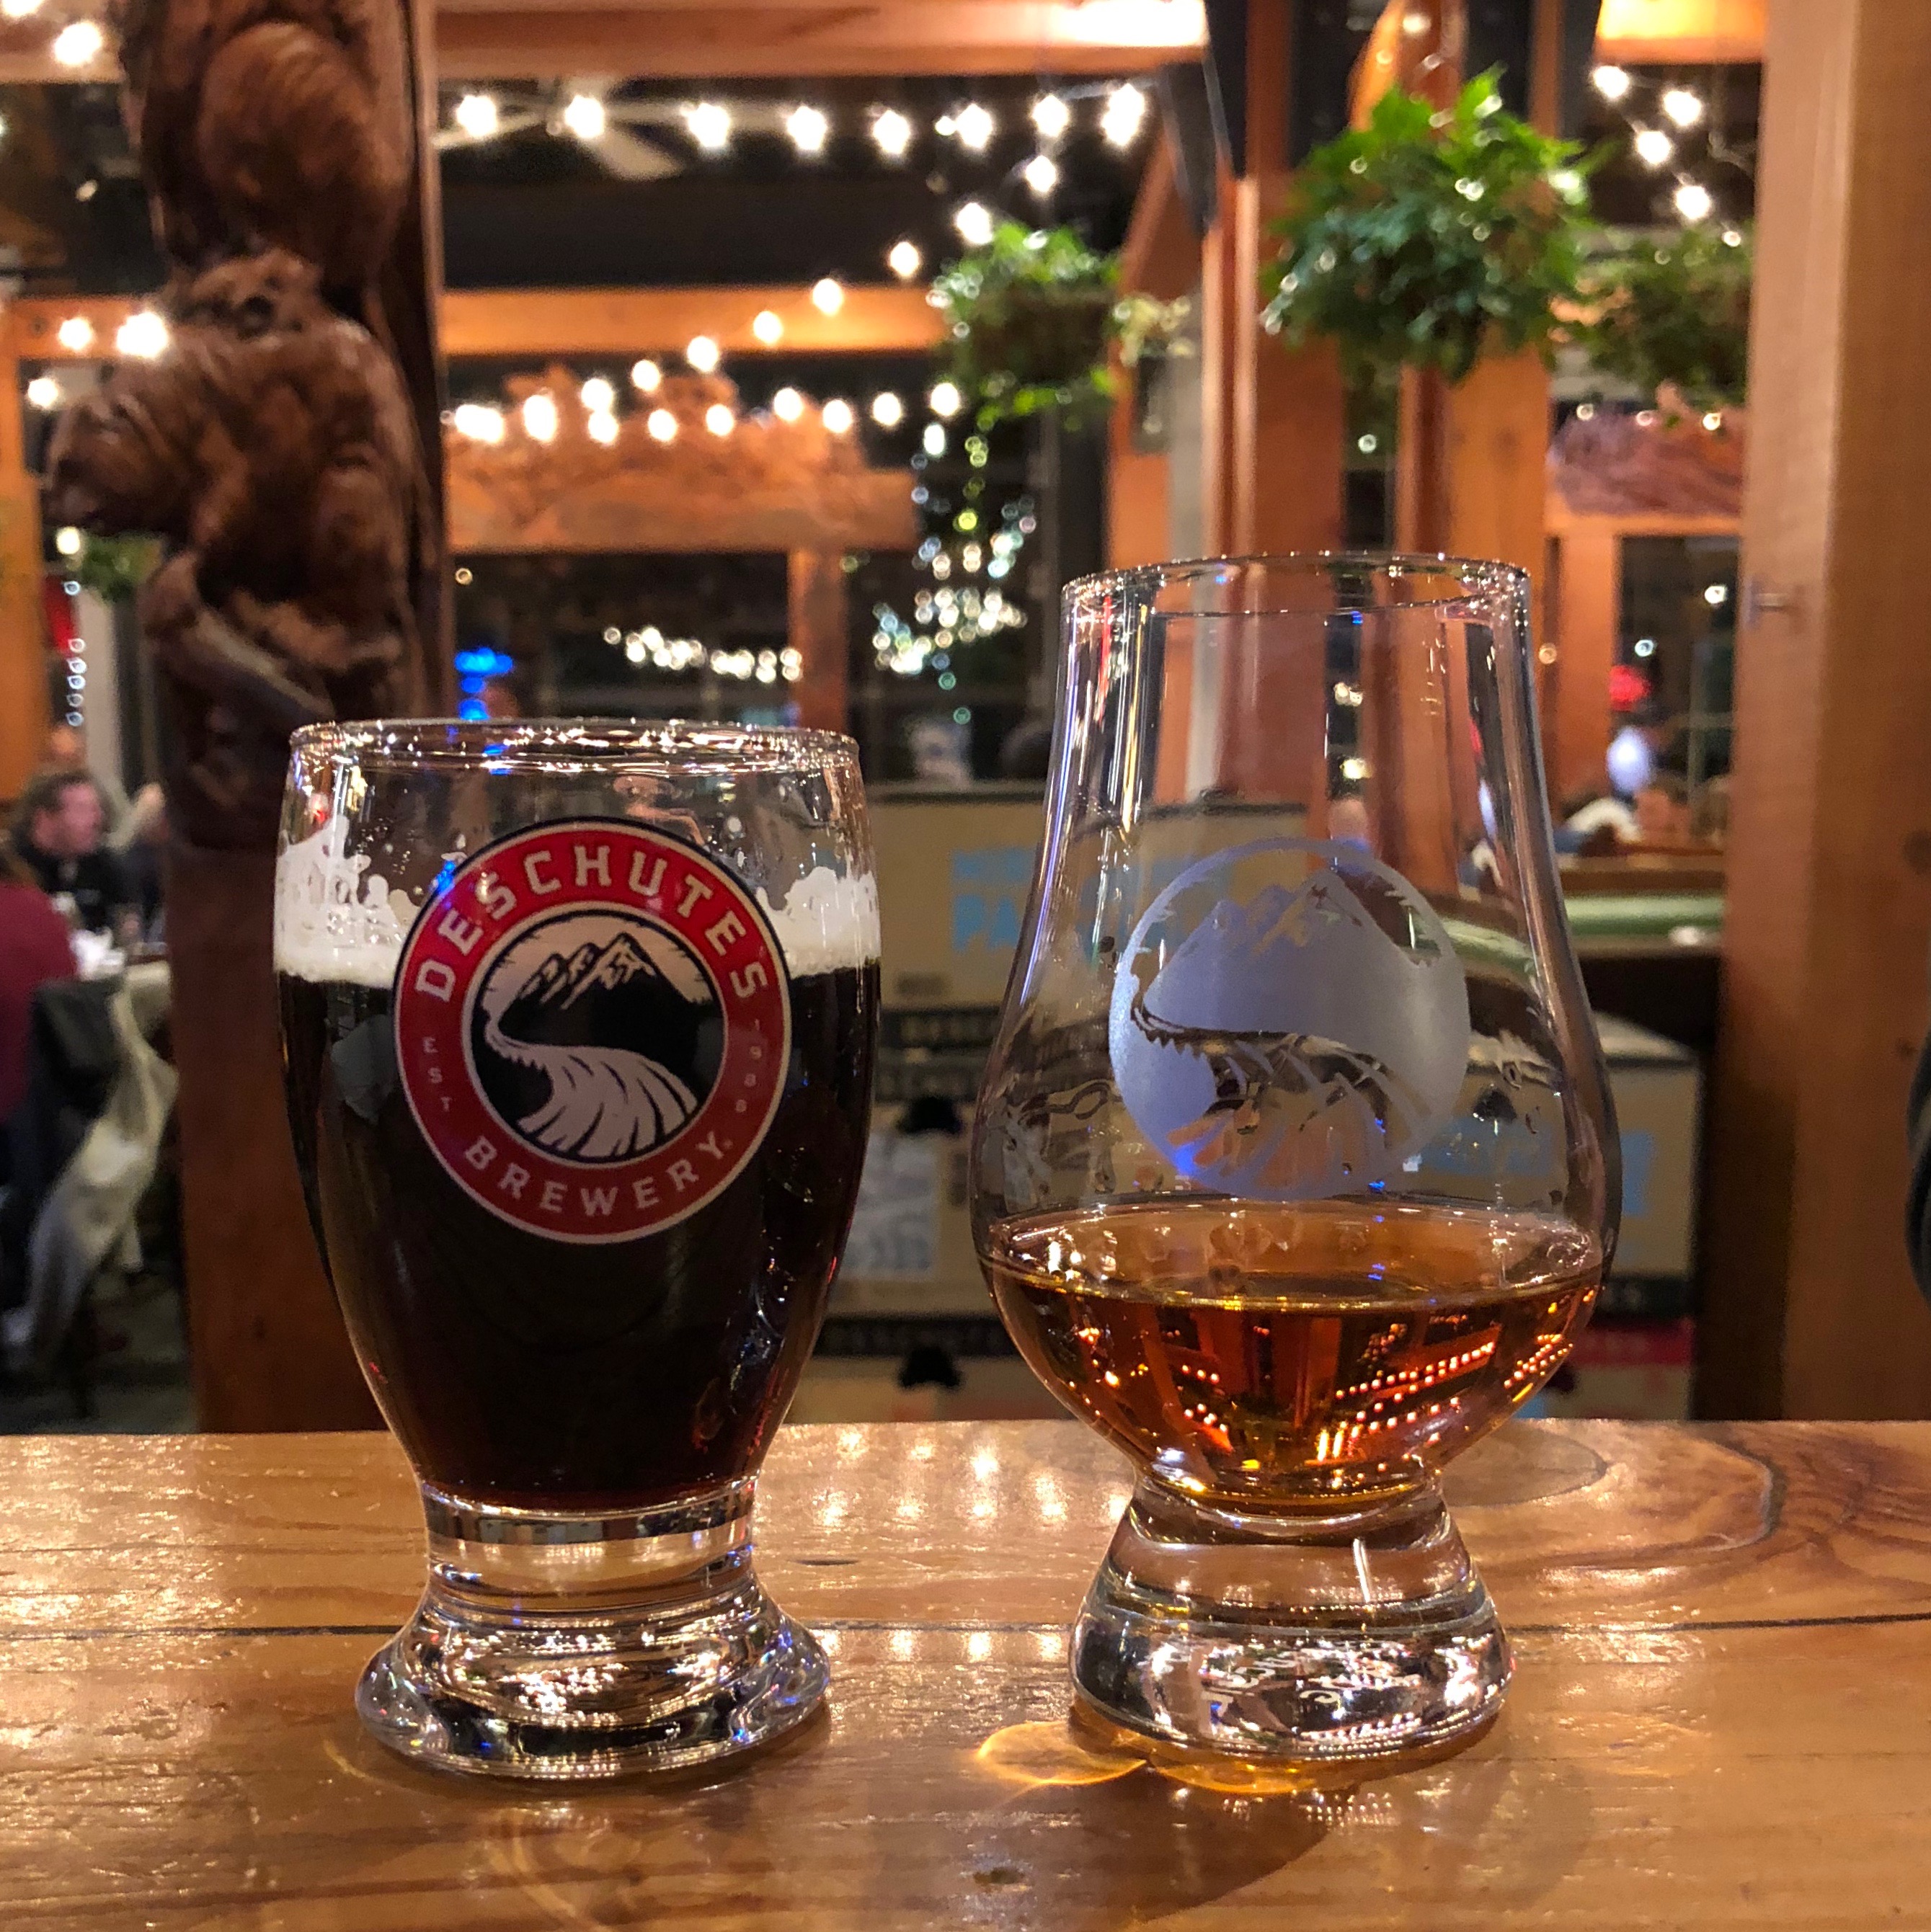 Deschutes Brewery and Bendistillery released the second bottling of its Black Butte Whiskey in early December. This whiskey is available by the dram at Deschutes in the Pearl District.